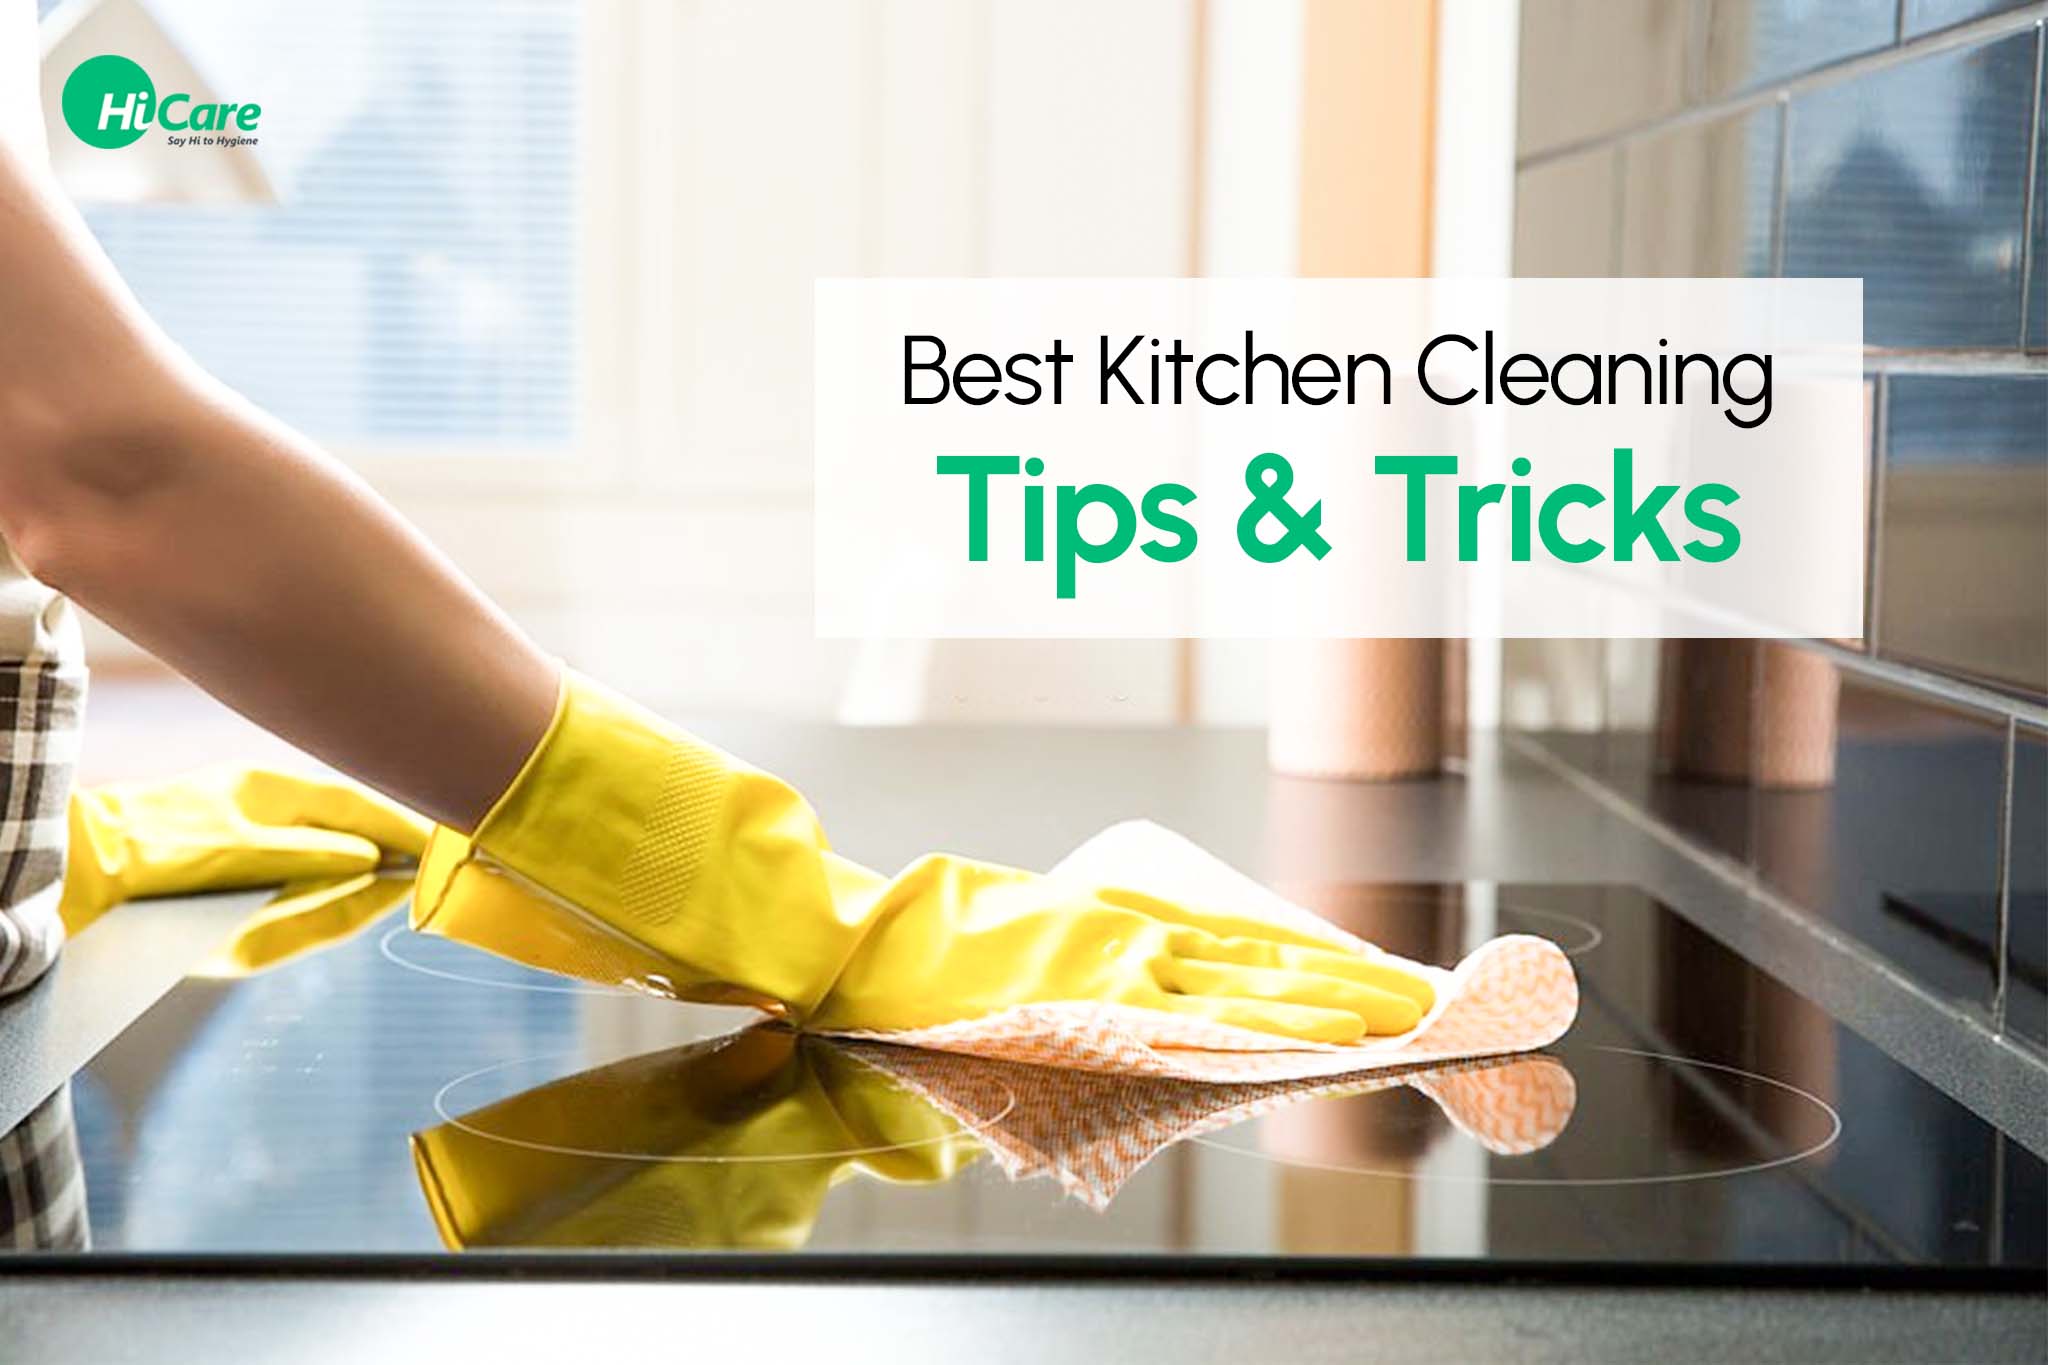 Best Kitchen Cleaning Tips & Tricks | HiCare